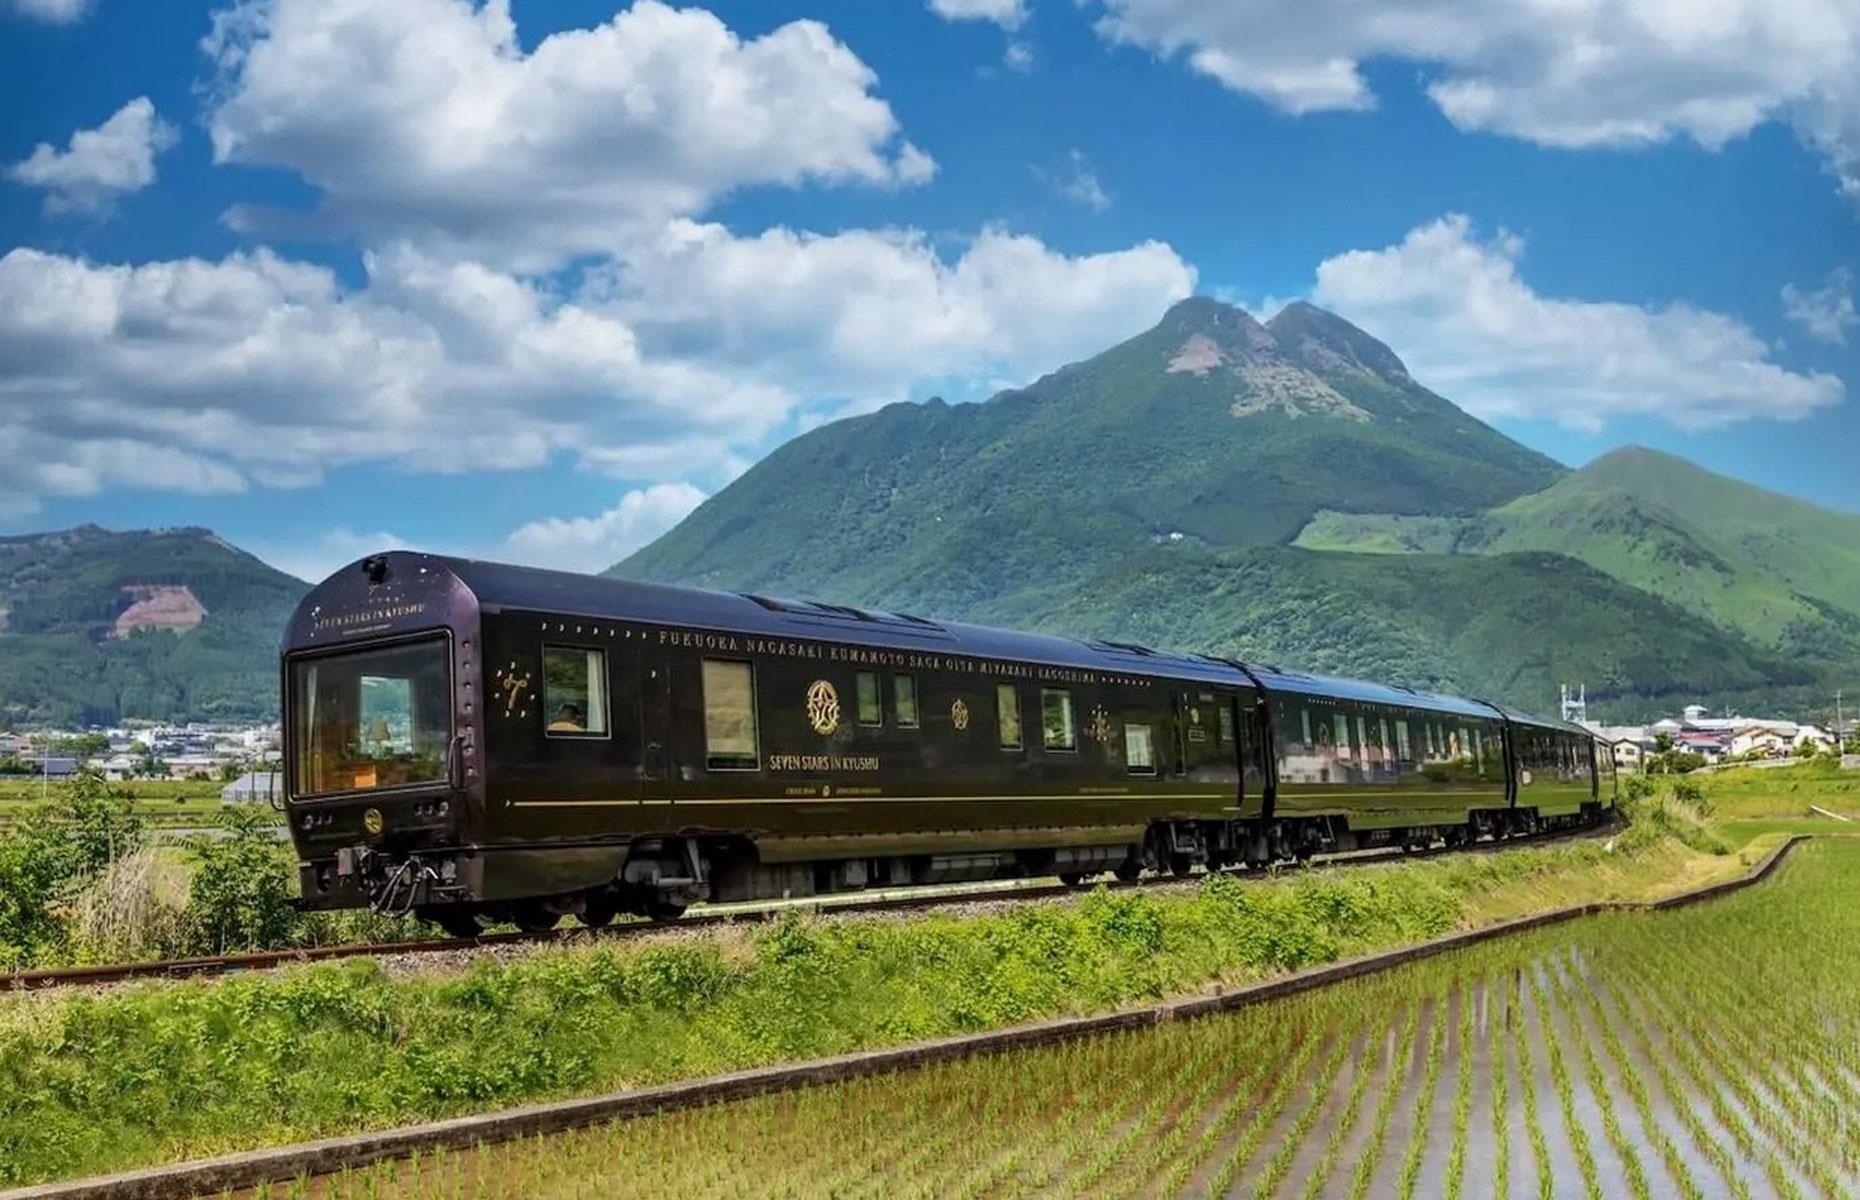 <p>As well as being one of the priciest luxury train experiences in the world, Japan's <em>Seven Stars in Kyushu</em> has got to be the most exclusive.</p>  <p>Simply being super-rich isn't enough to secure a seat on the highly desirable train: with each journey restricted to just 20 guests, potential passengers sometimes have to apply for their tickets, with winners selected lottery-style.</p>  <p>The seven-carriage "cruise train" debuted in 2013 and has been a hit from the beginning.</p>